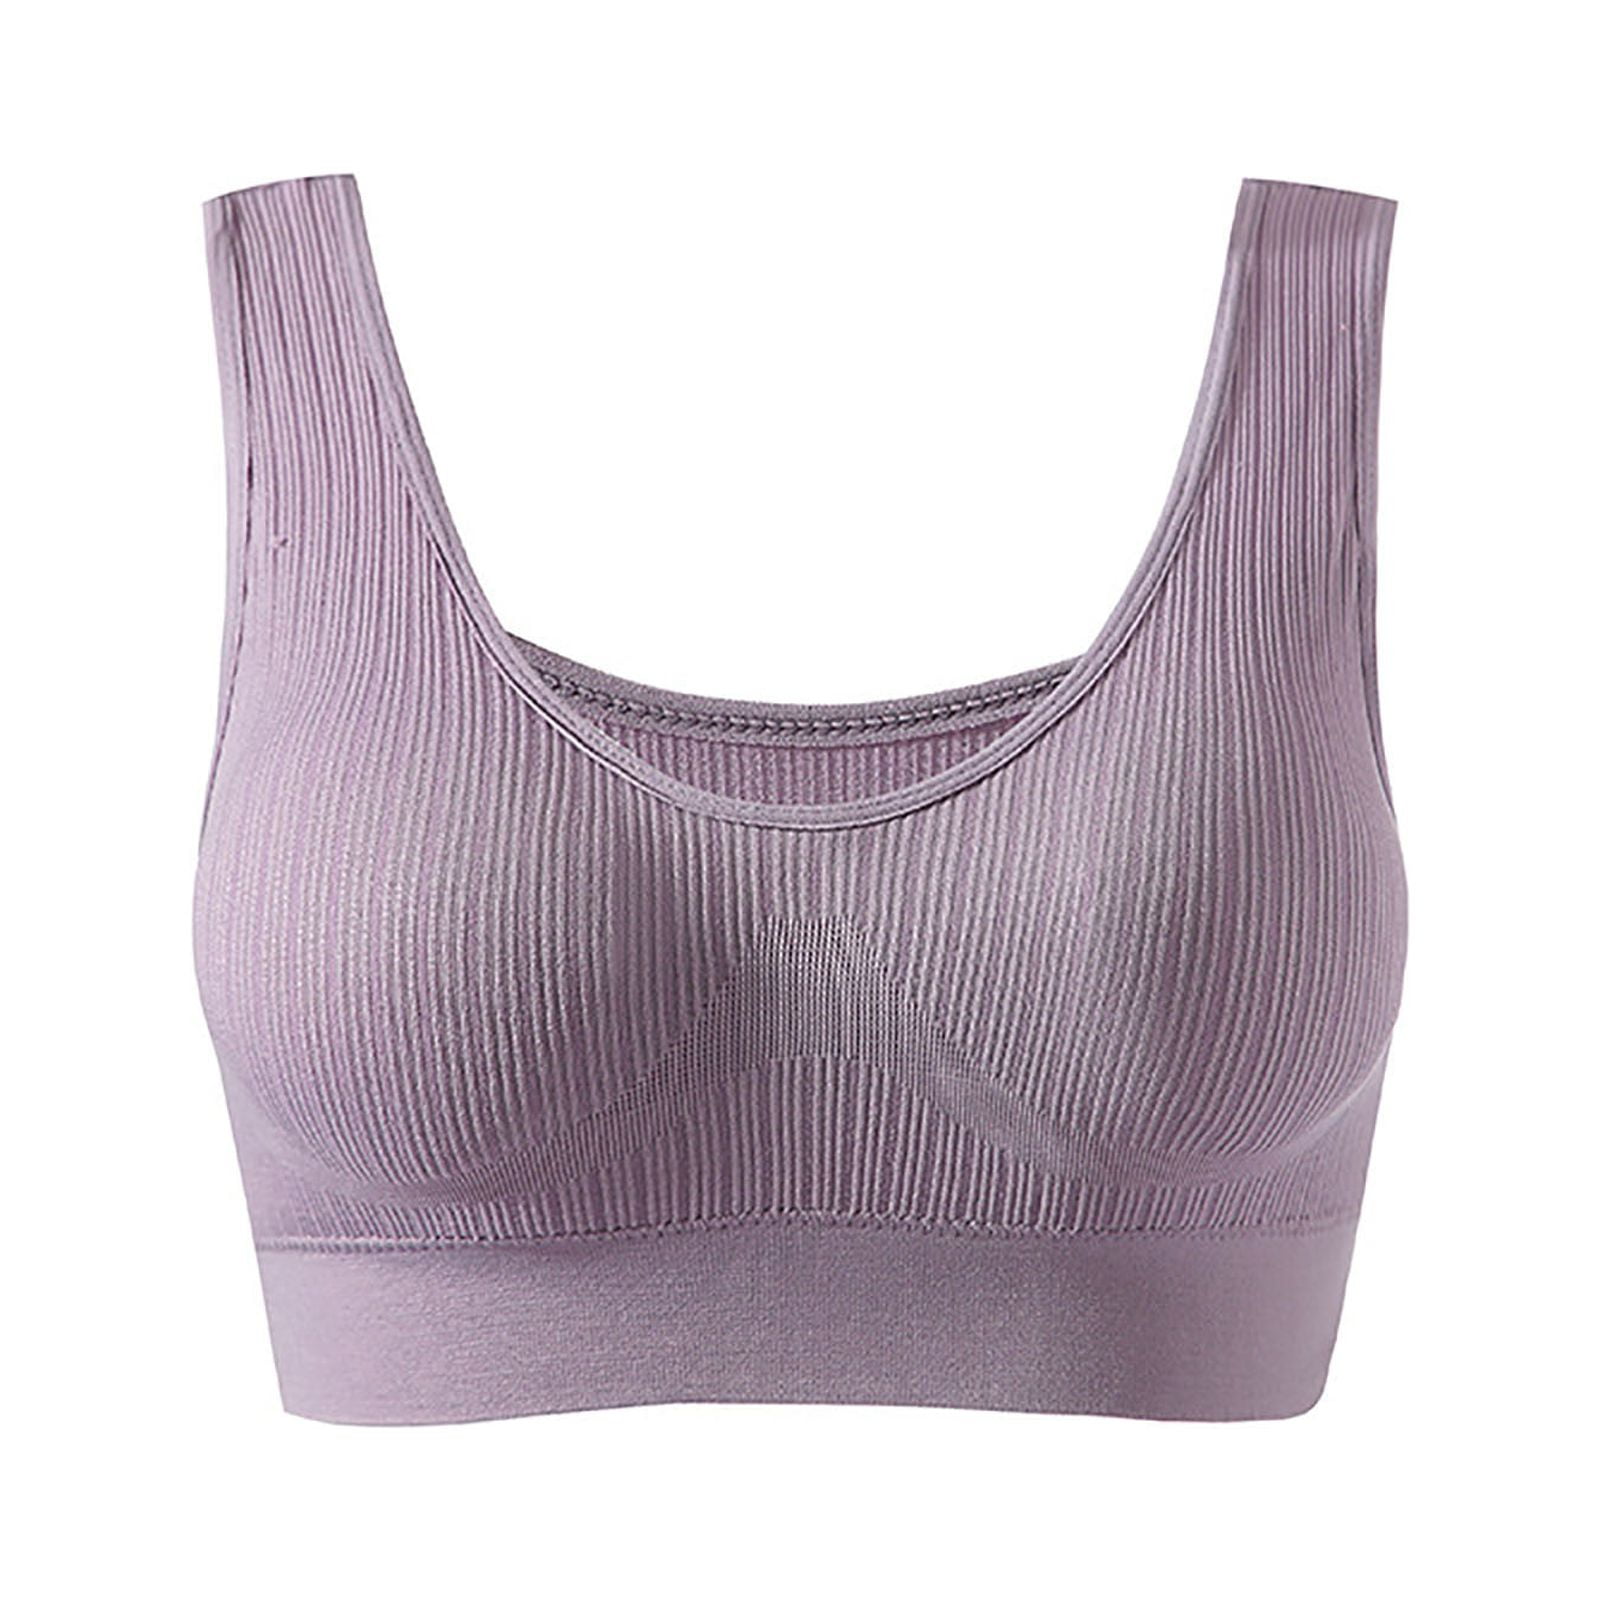 CAICJ98 Bras for Women High Neck Supportive Sports Bra High Impact - No  Bounce Soft Moisture Wicking for Running Racerback Plus Size Purple,XL